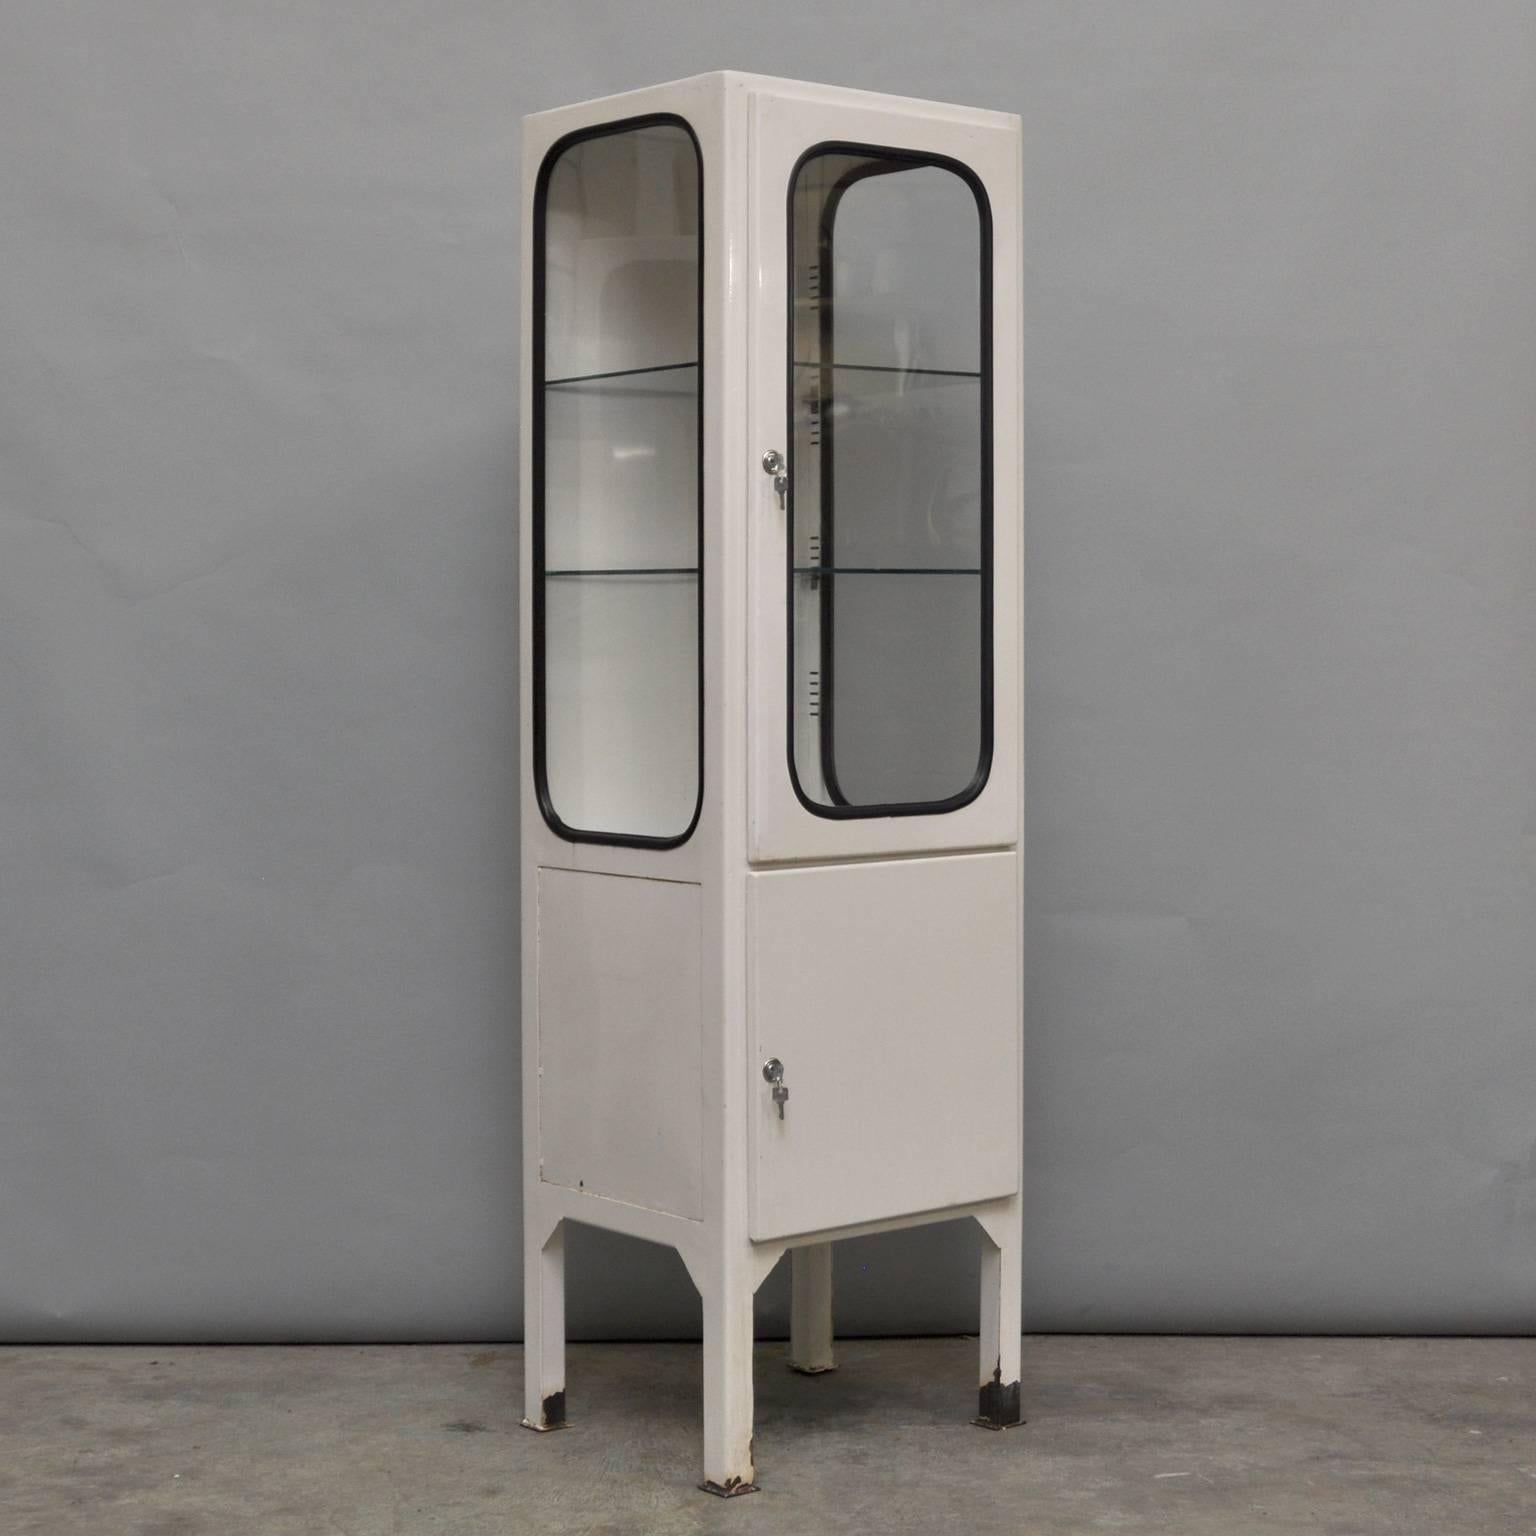 This medicine cabinet was designed in the 1970s and produced circa 1975 in Hungary. Made from steel and glass, the glass is held in place by a black rubber strip. The cabinet arrives with two adjustable glass shelves and a functioning locks.